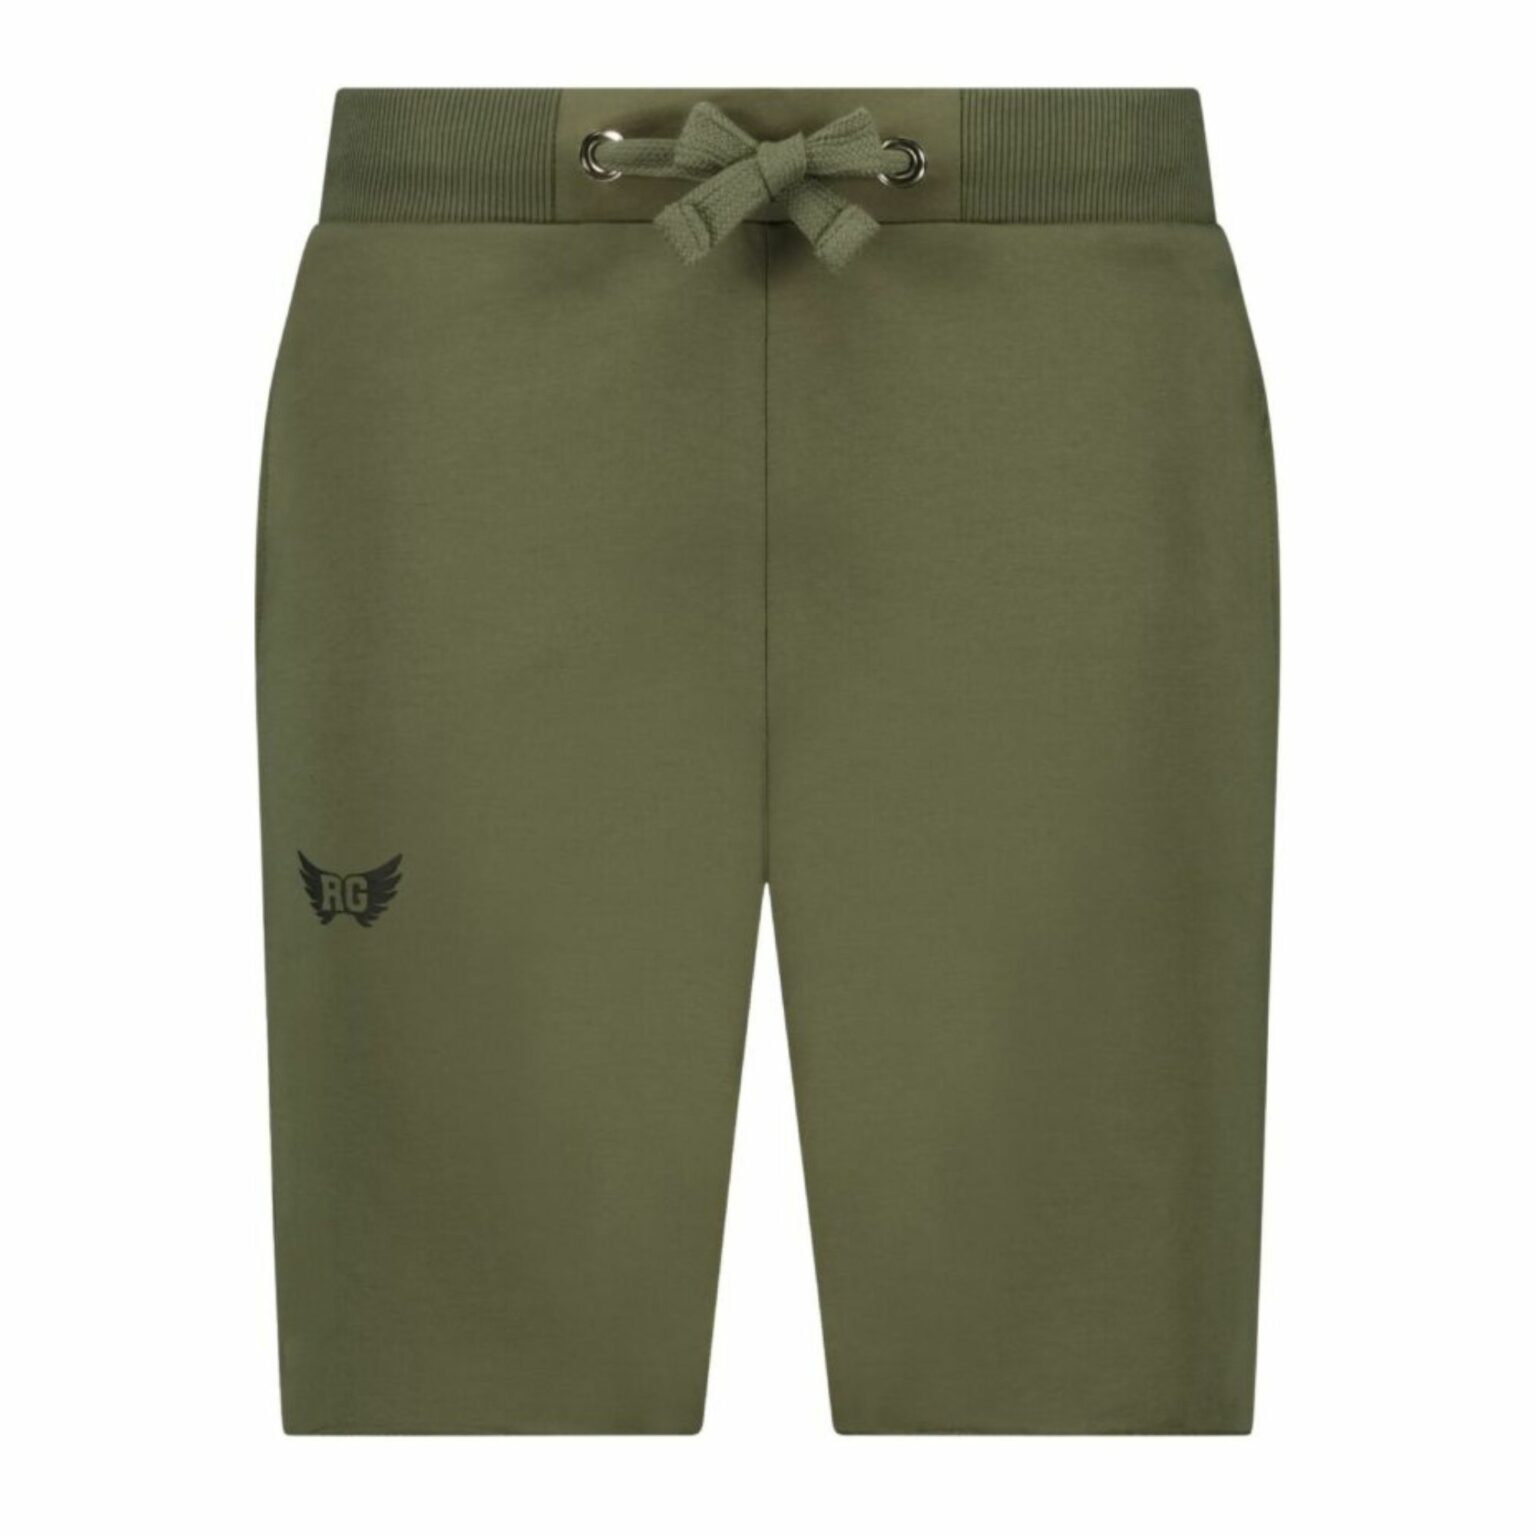 bodhi-shorts-olive-green-front